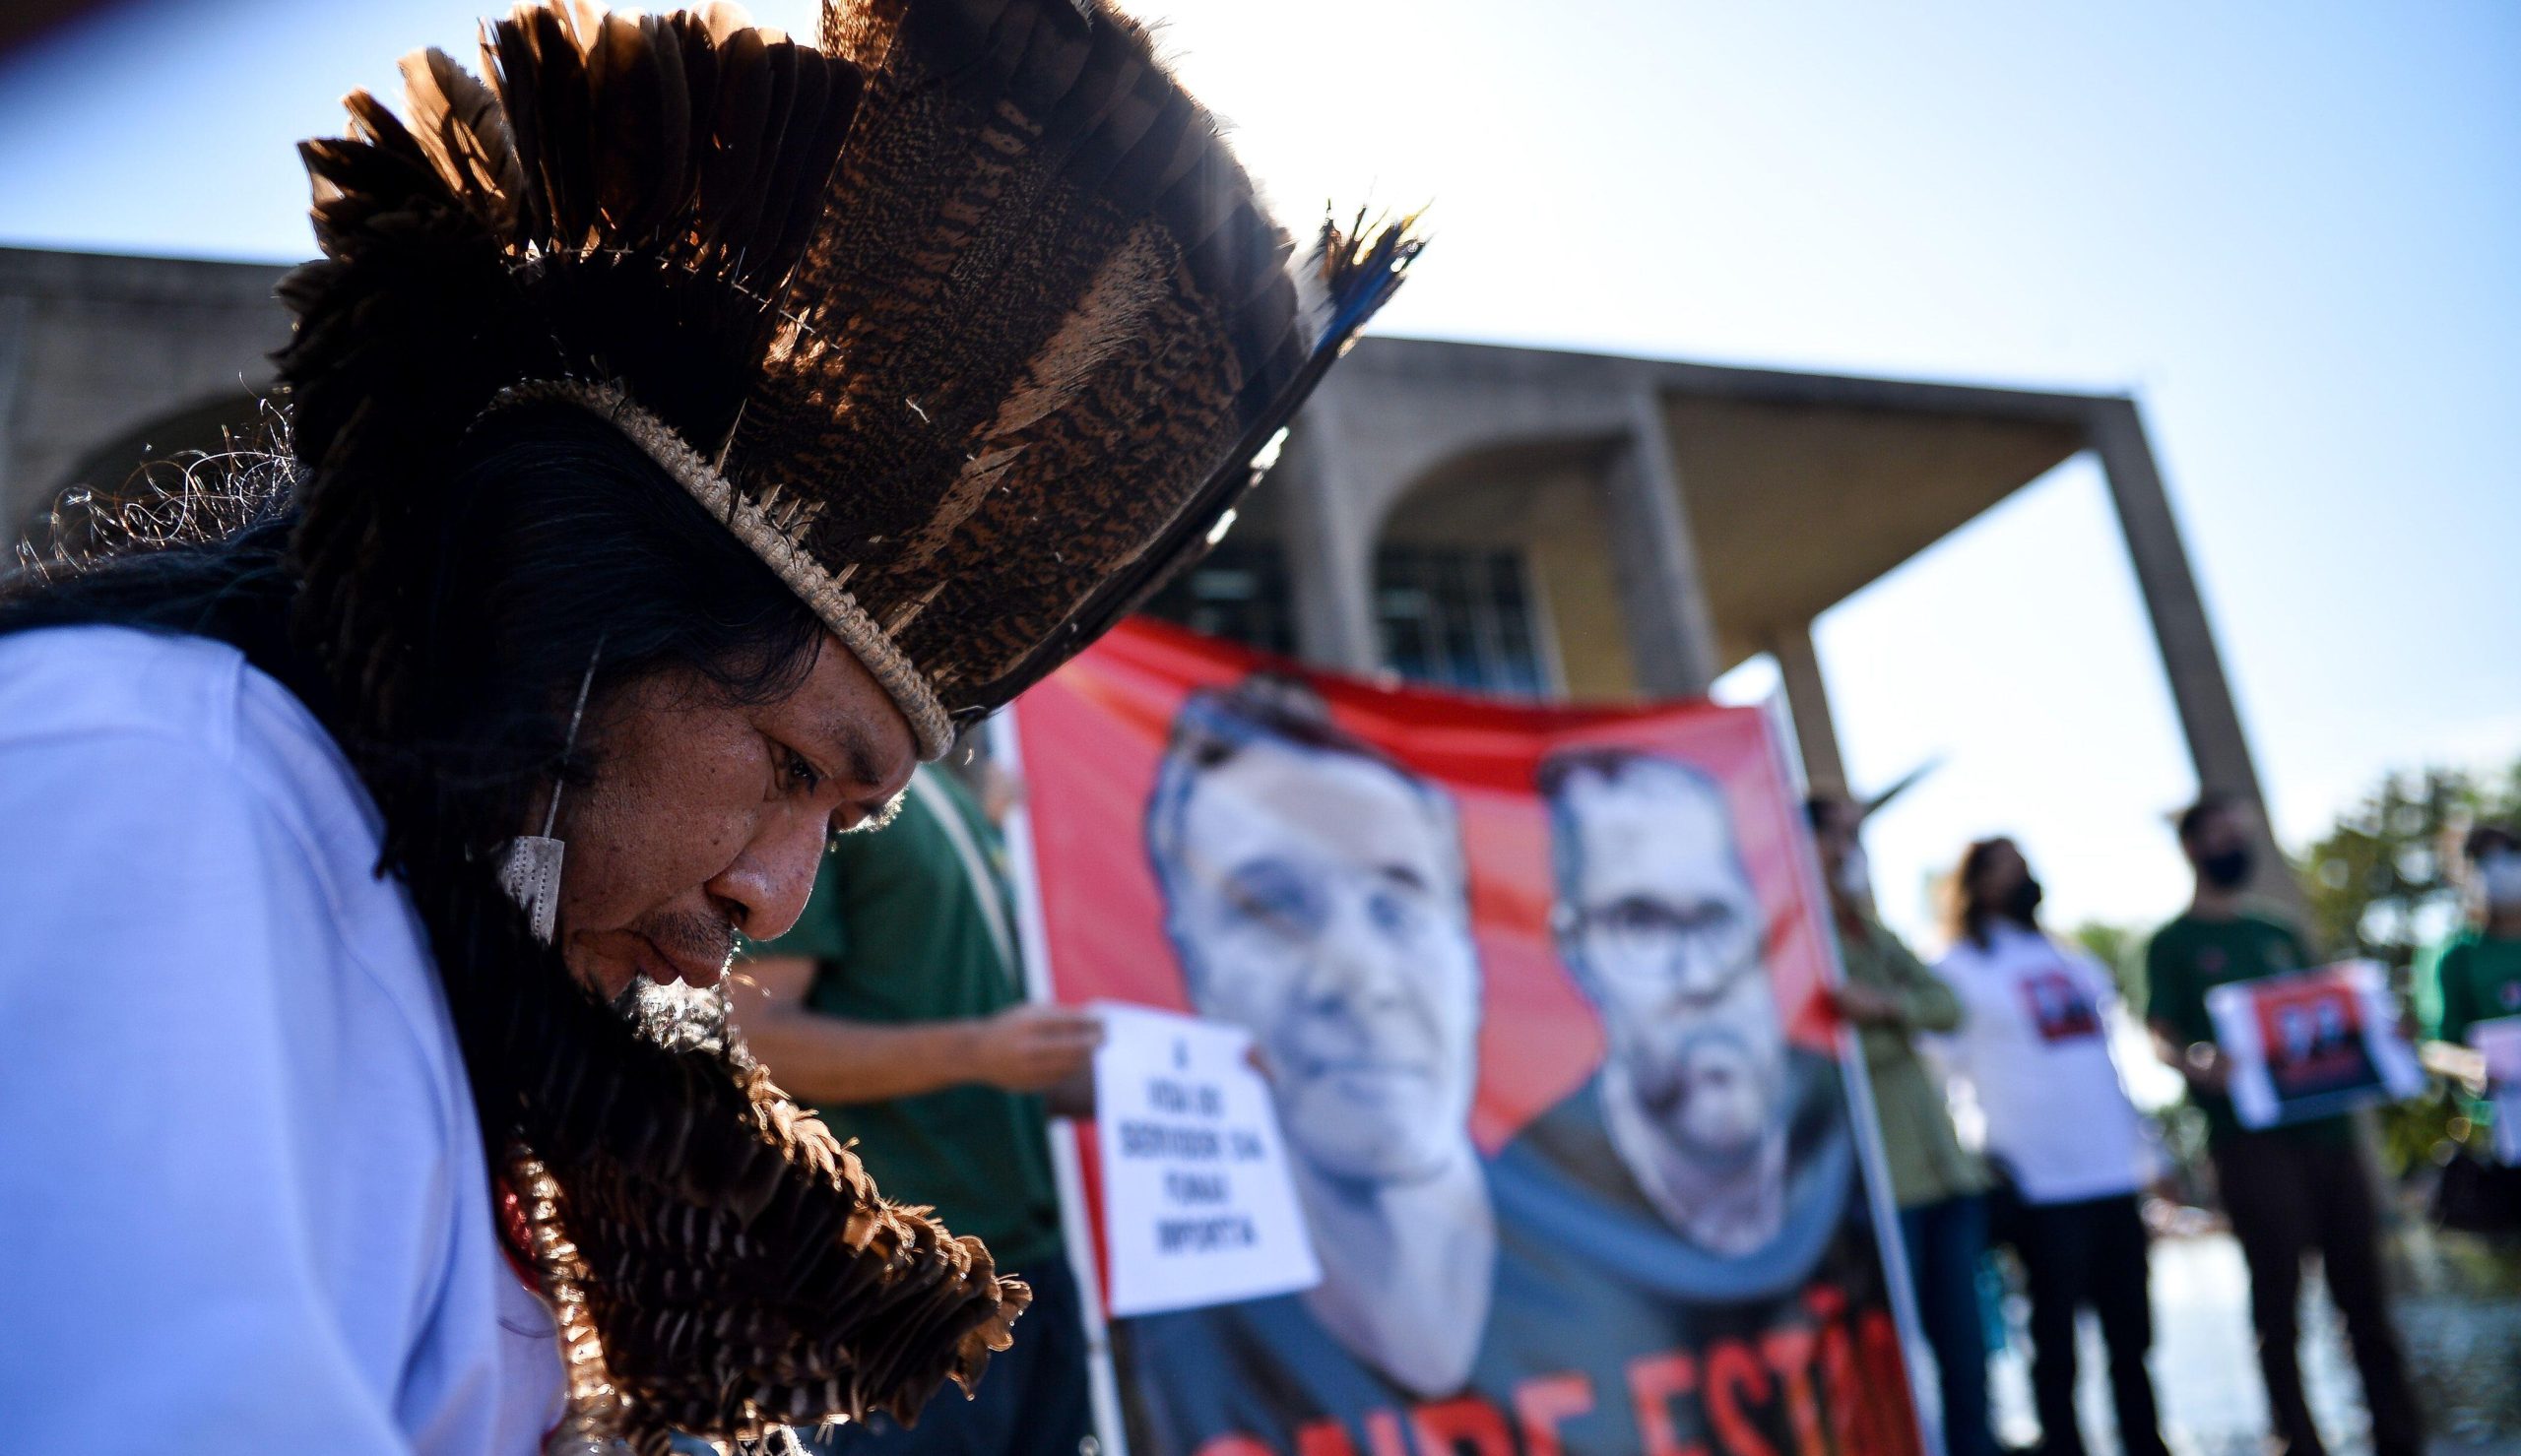 An Indigenous protestor demonstrates outside Brazil’s Ministry of Justice